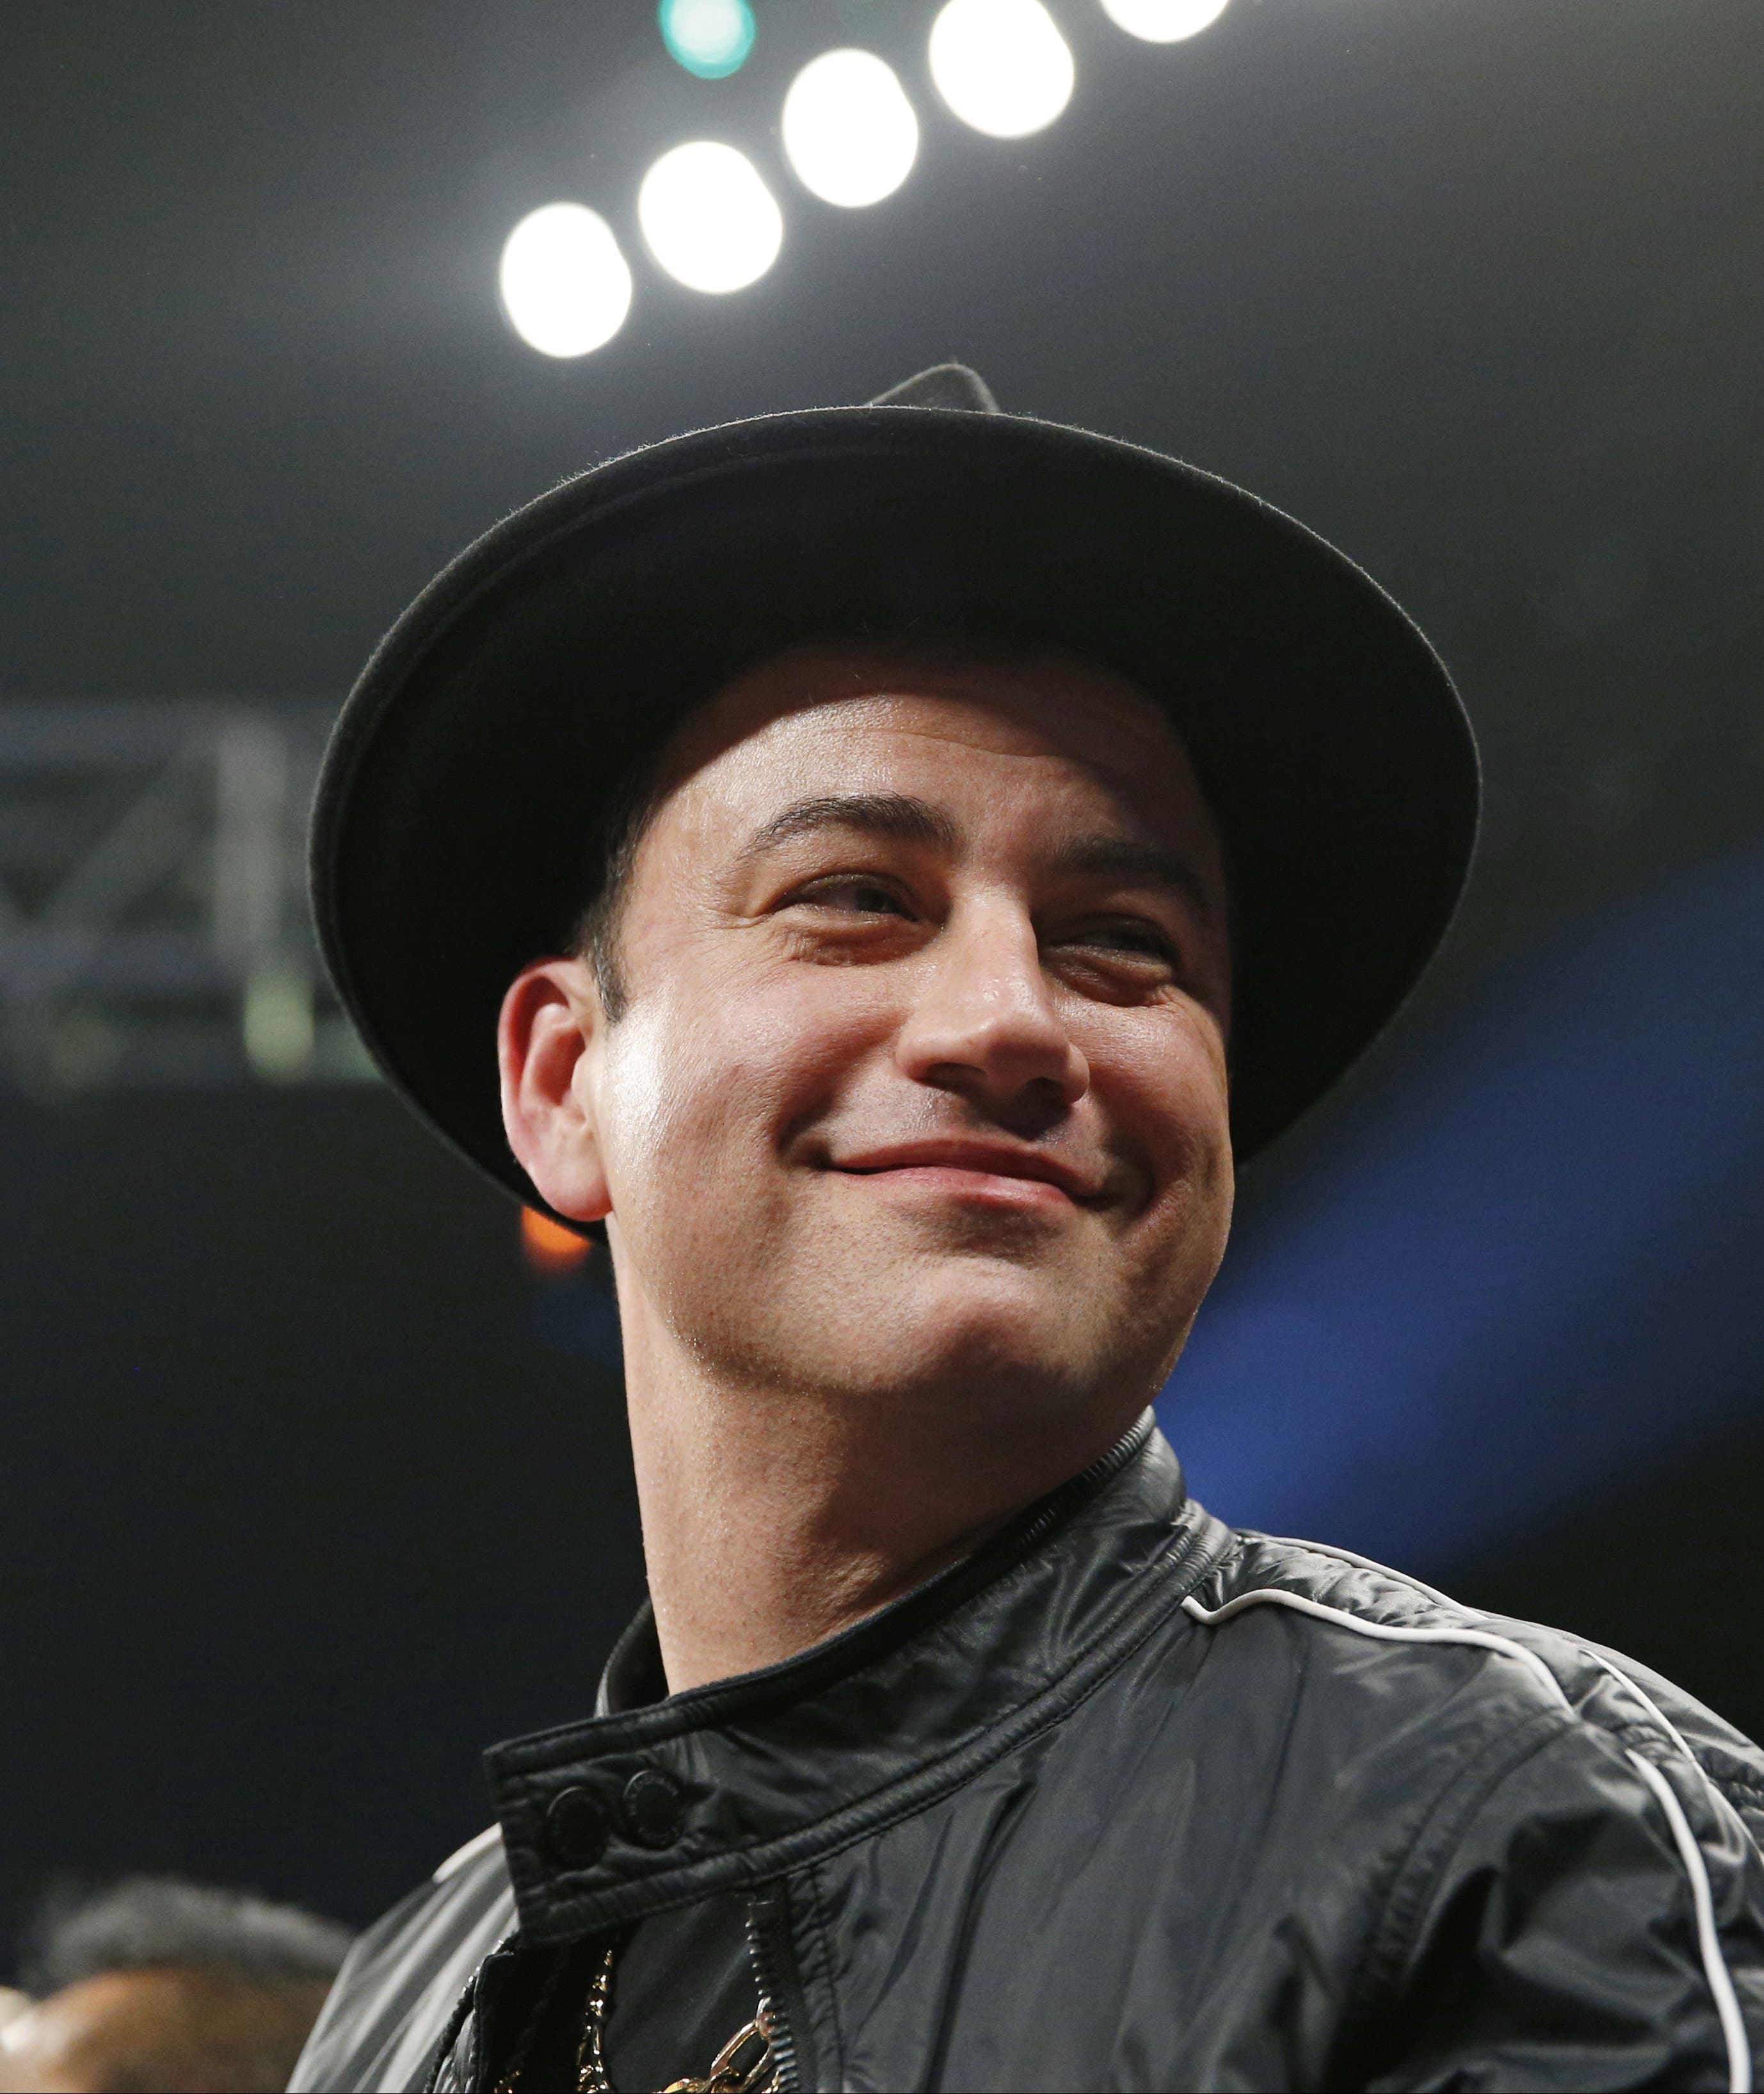 Comedian Jimmy Kimmel joins the crowd before the start of the world welterweight championship. (AP)